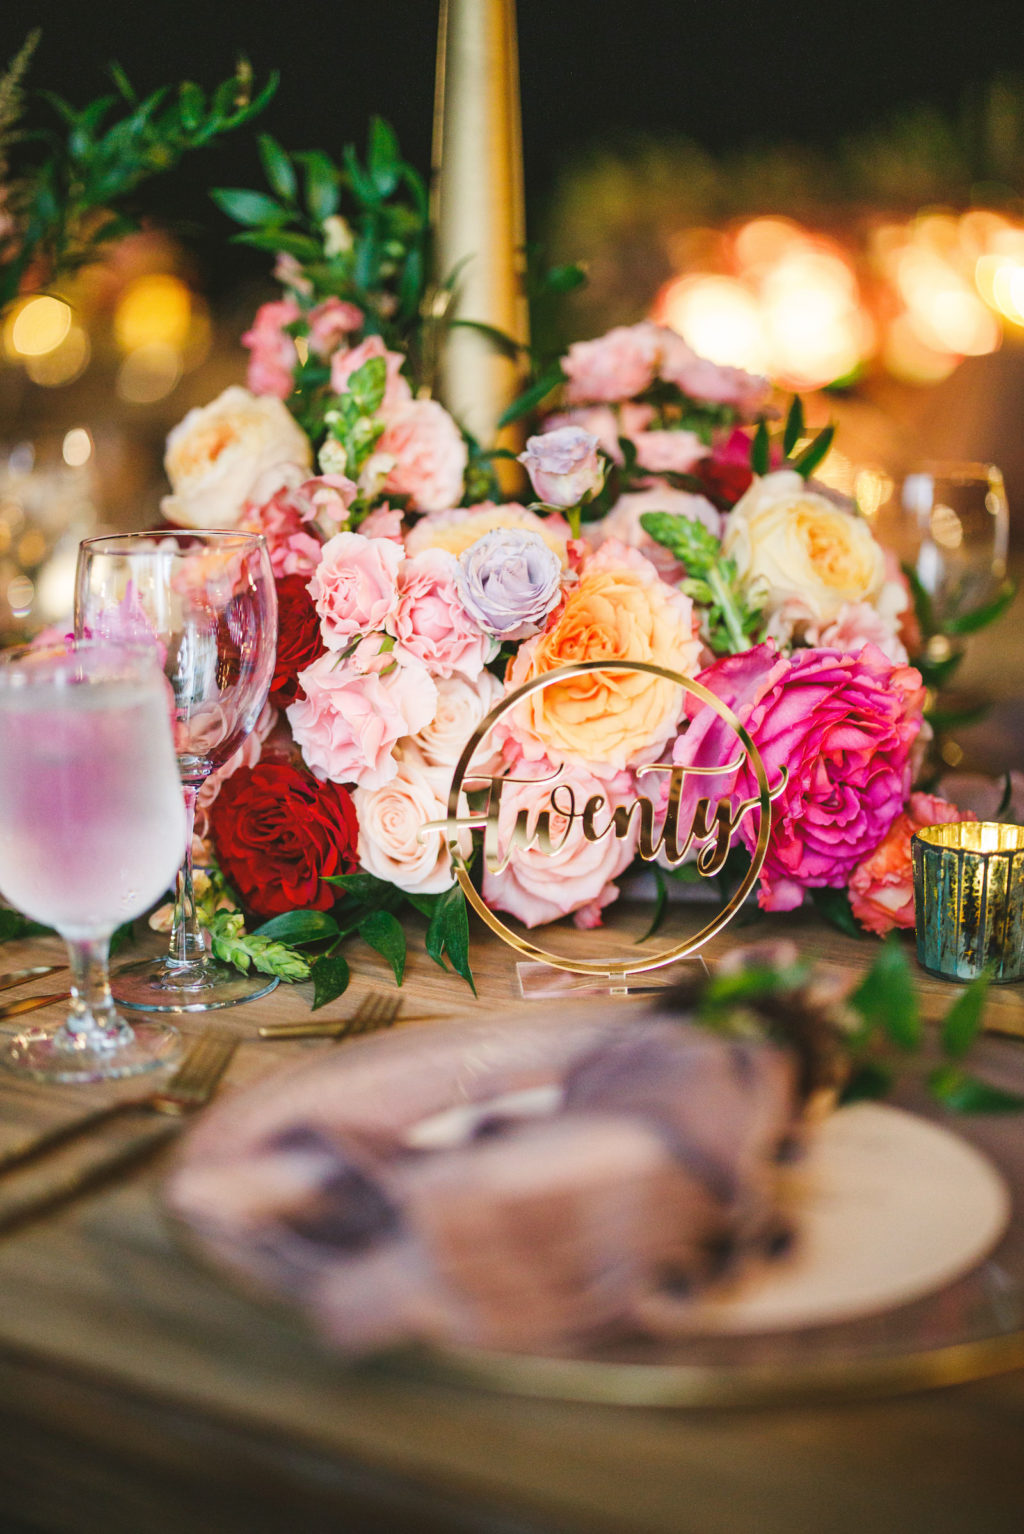 Colorful Peach, Blush Pink, Fuchsia and Orange Rose Centerpieces with Greenery and Candles | Gold Die Cut Round Wedding Table Number